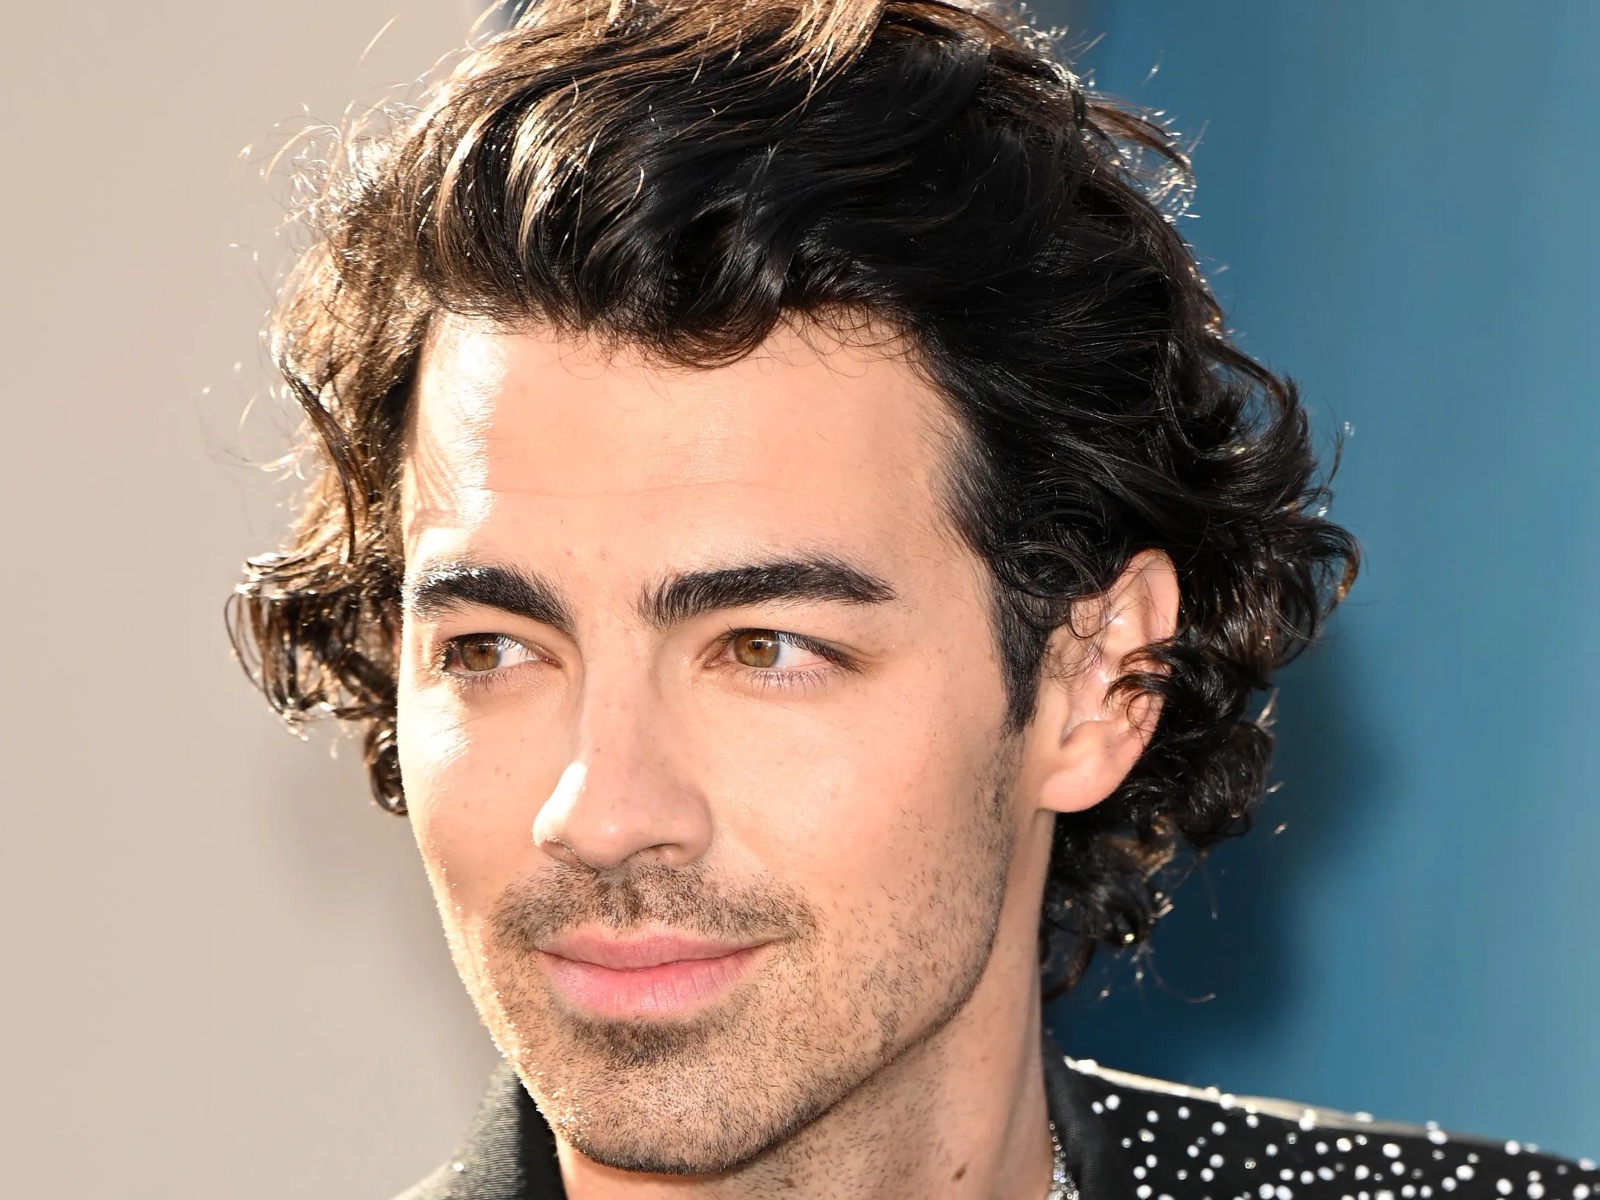 It’s Time to Decide If These Popular Male Celebrities Are Attractive or Not Joe Jonas